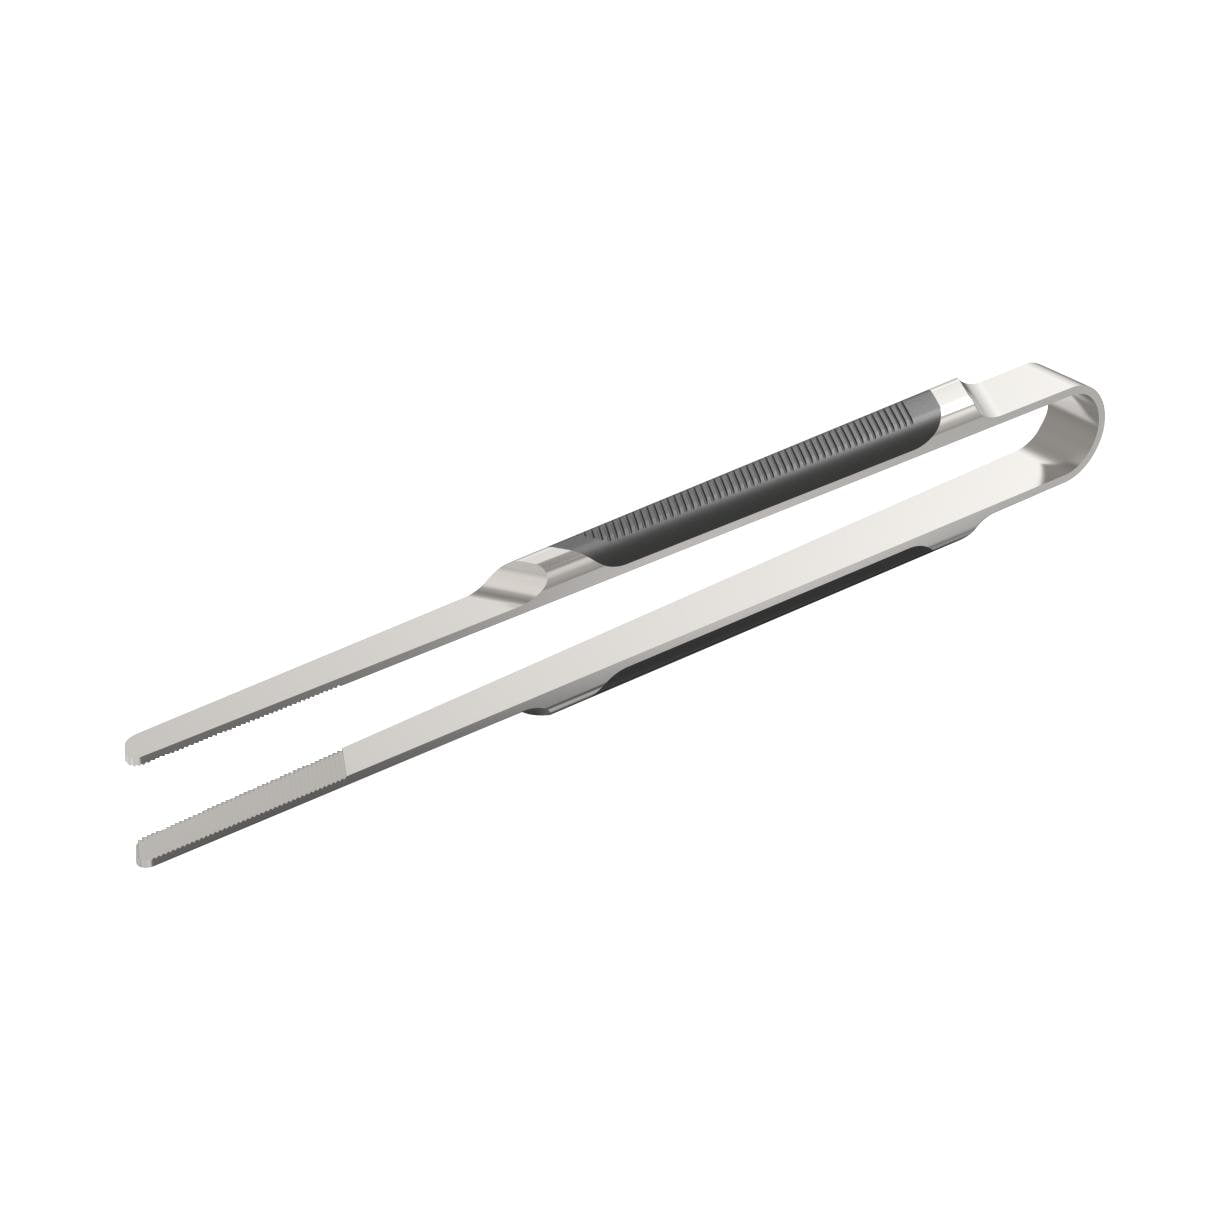 Details about   2pcs/lot Anti-static Precision Pincet Stainless Steel ESD Tweezers Set Pinzas 